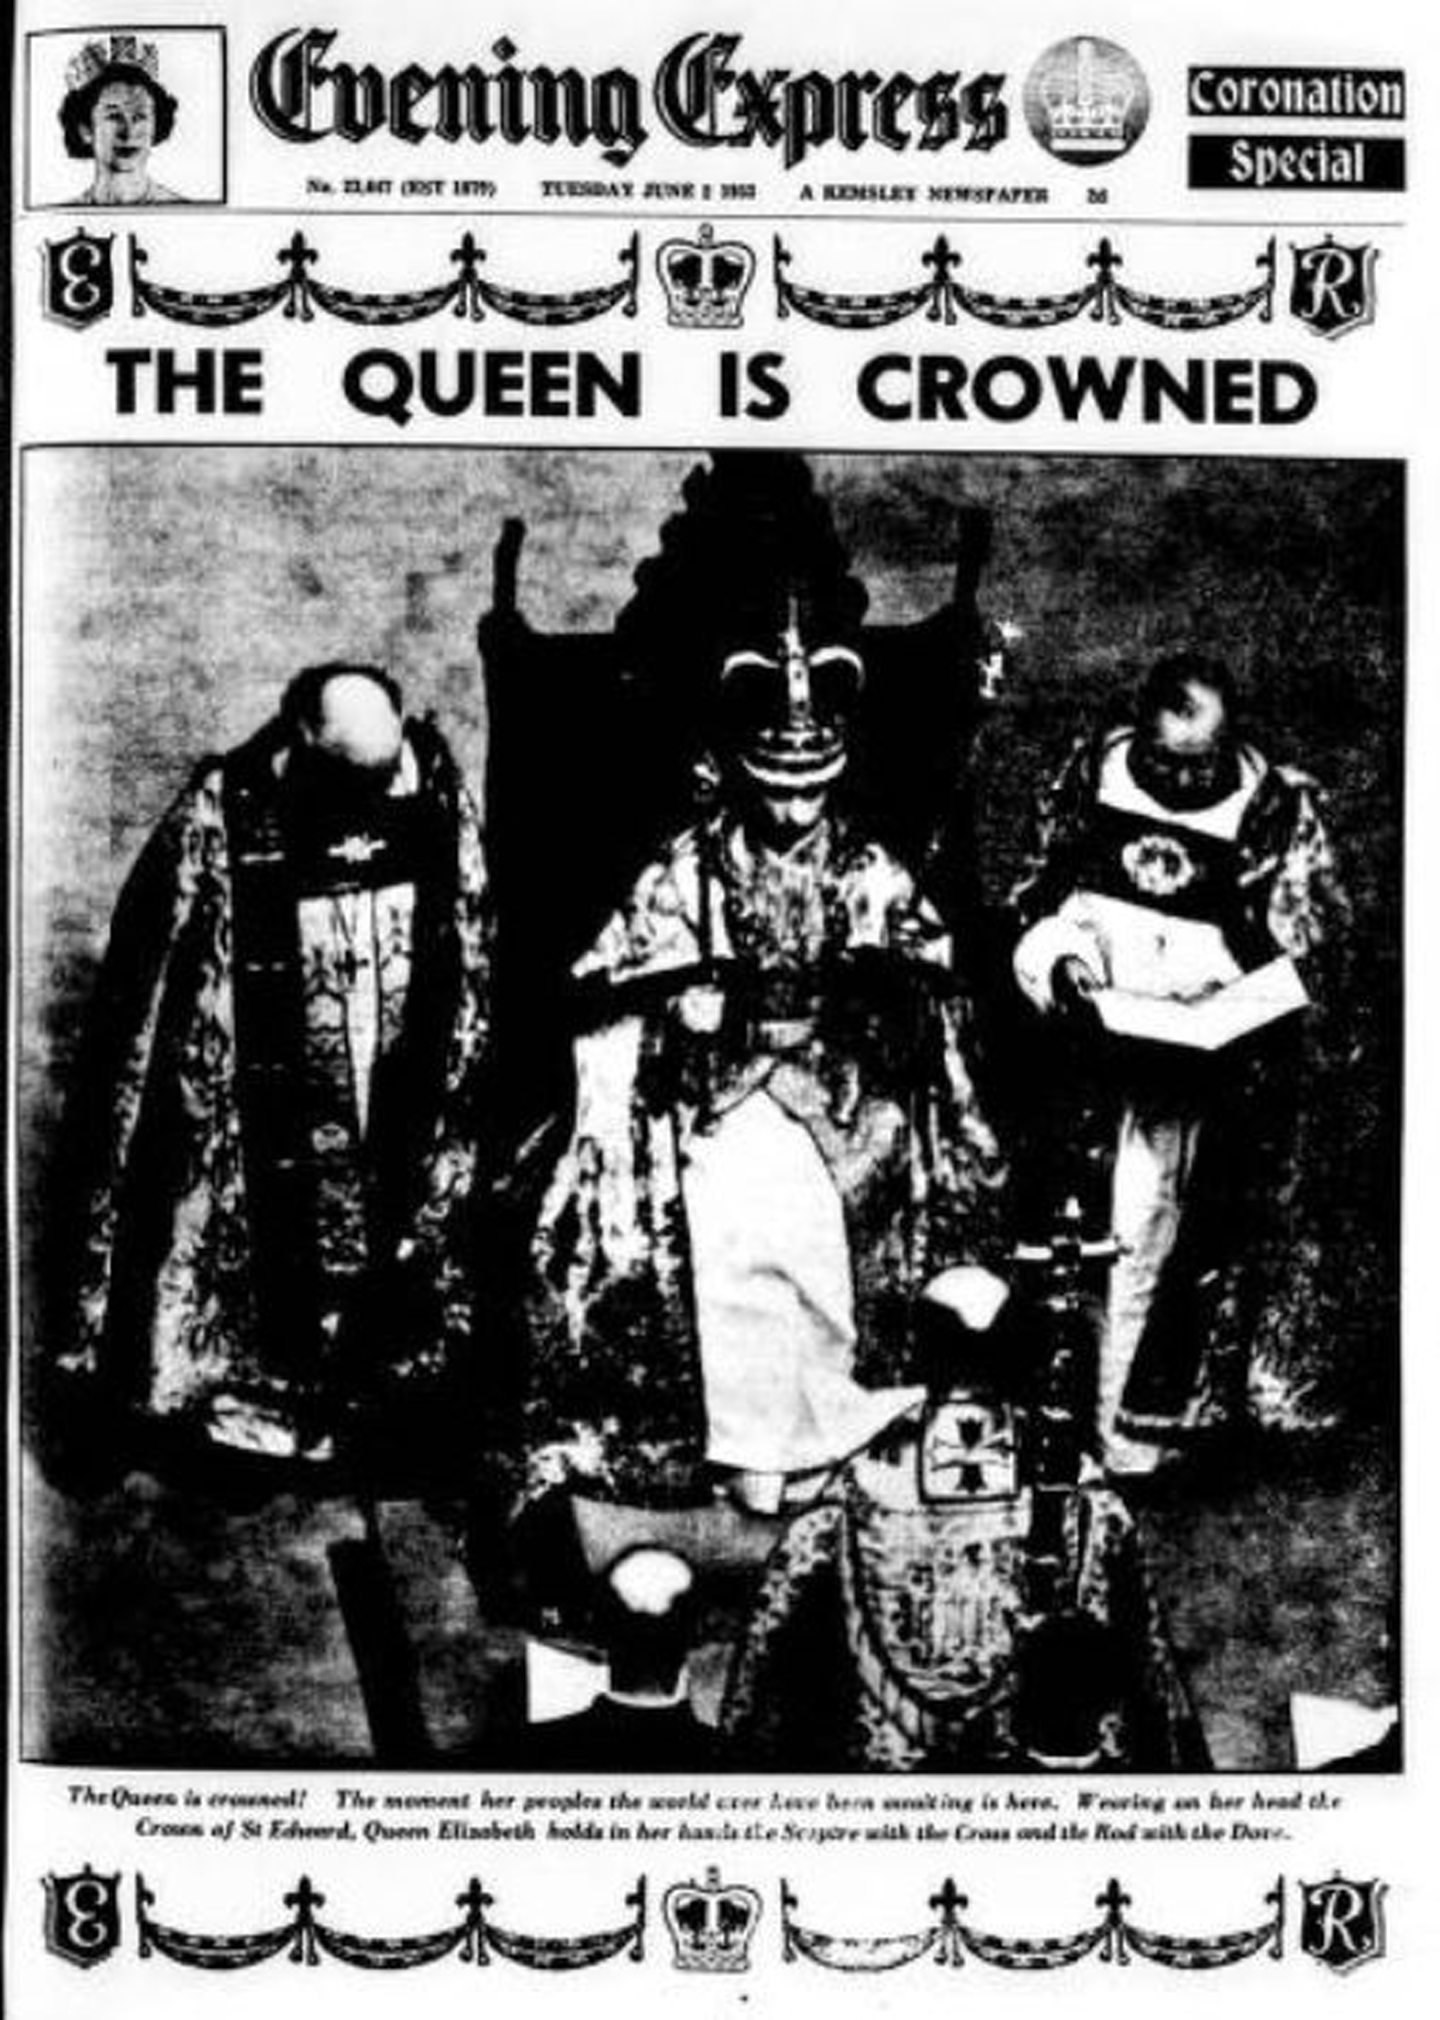 The Evening Express front page from June 2 1953 with the headline 'The Queen is Crowned' and a black-and-white photograph of Queen Elizabeth in her coronation regalia.